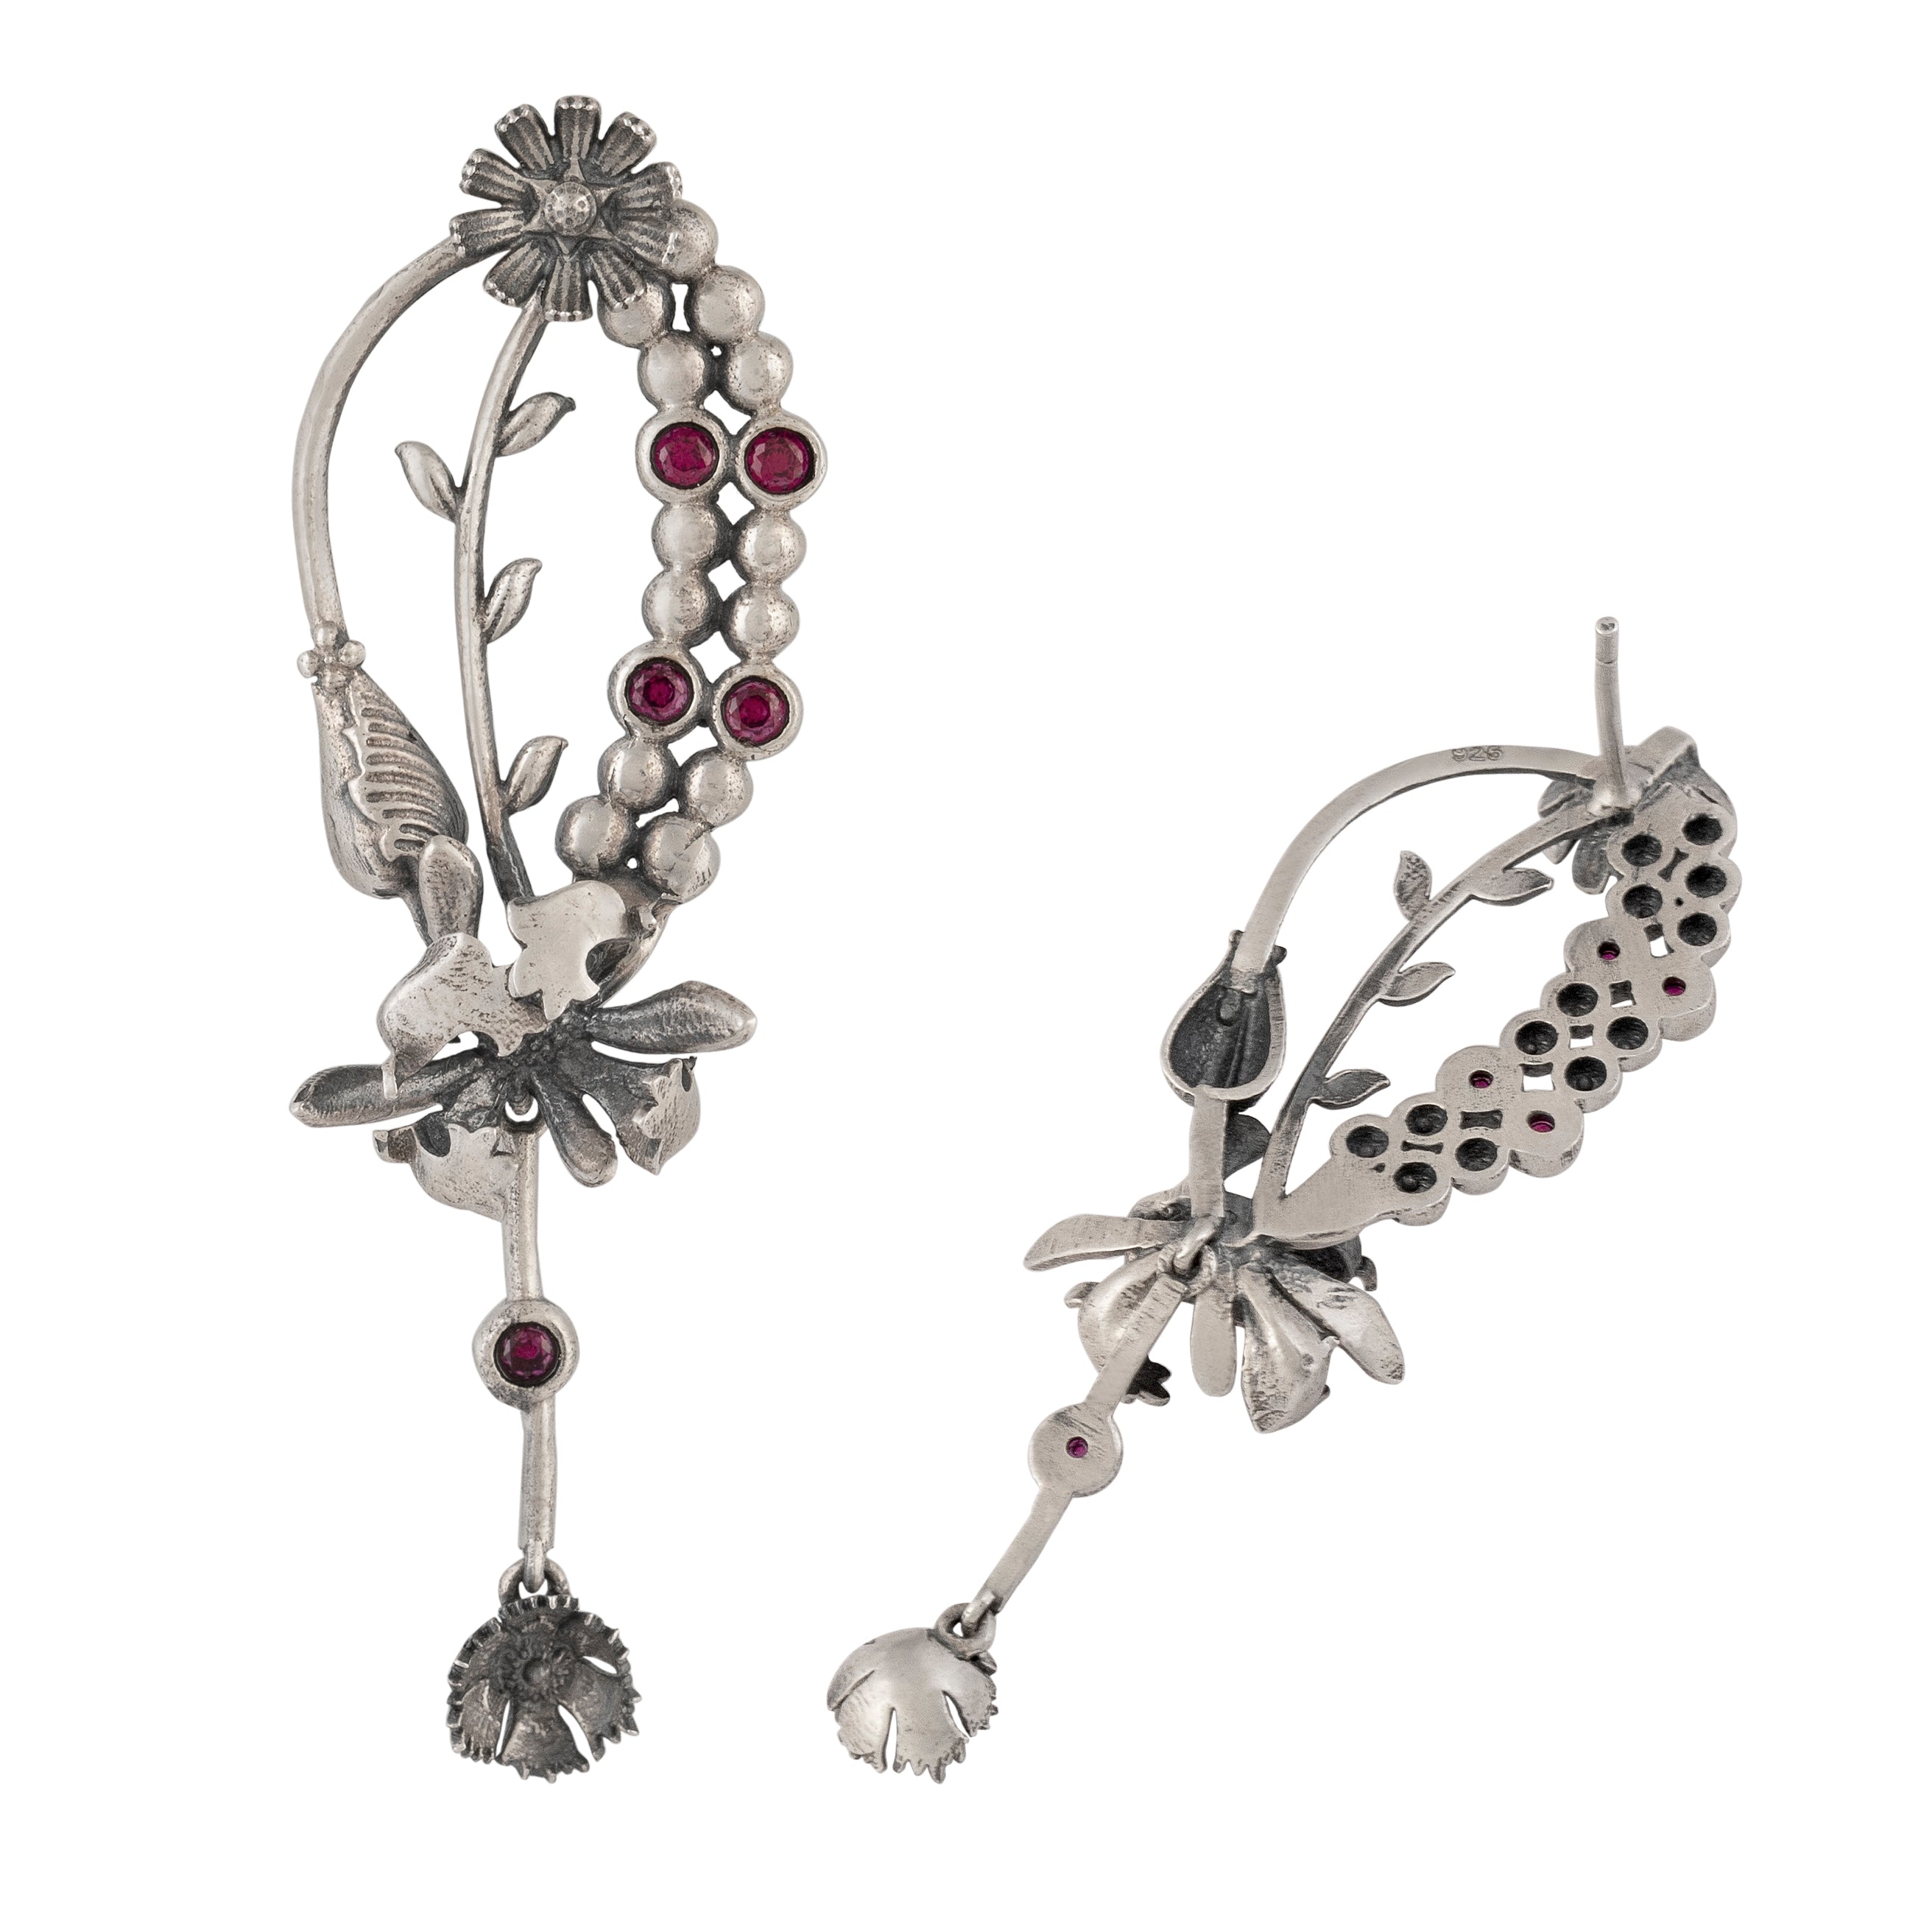 William Morris - Compton Buds Silver Dangling Earrings by Moha